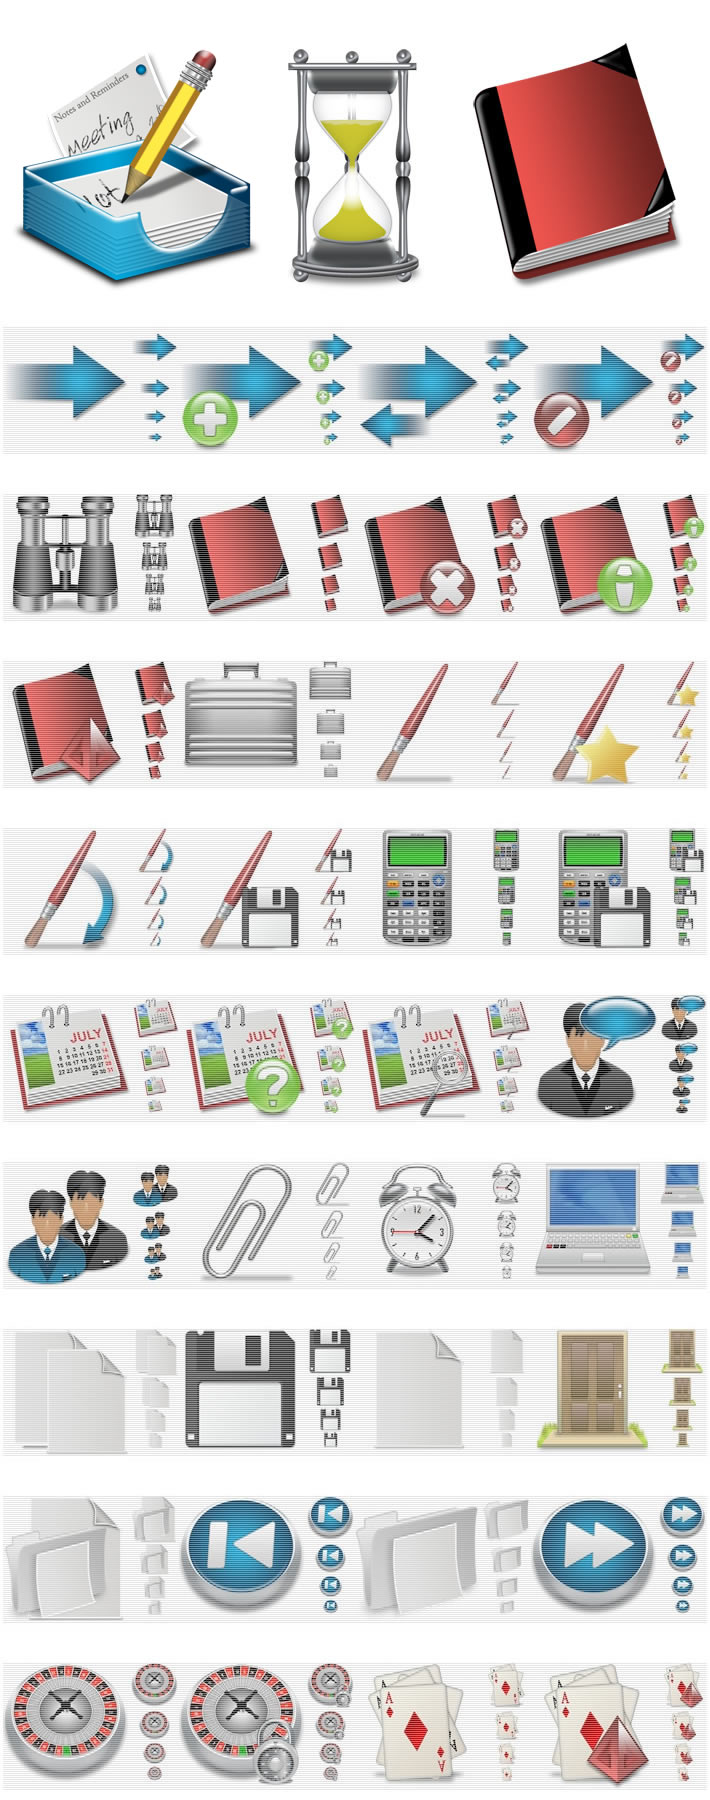 XMAC 1500 MAC style application icons